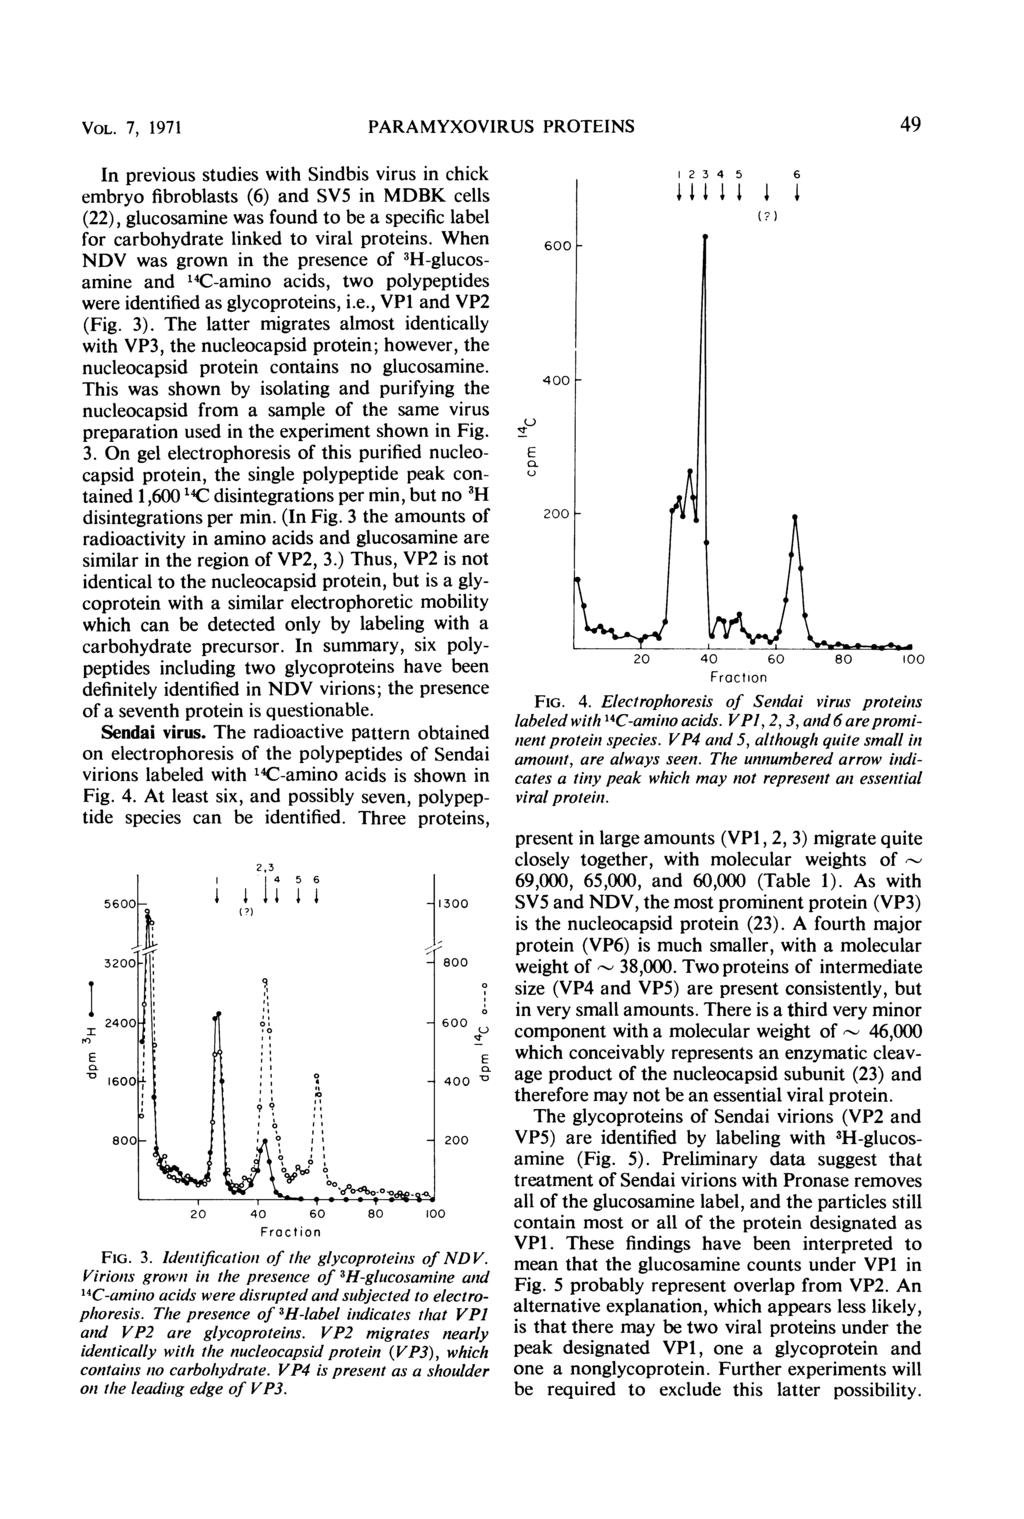 VOL. 7, 1971 PARAMYXOVIRUS PROTINS 49 In previous studies with Sindbis virus in chick embryo fibroblasts (6) and SV5 in MDBK cells (22), glucosamine was found to be a specific label for carbohydrate